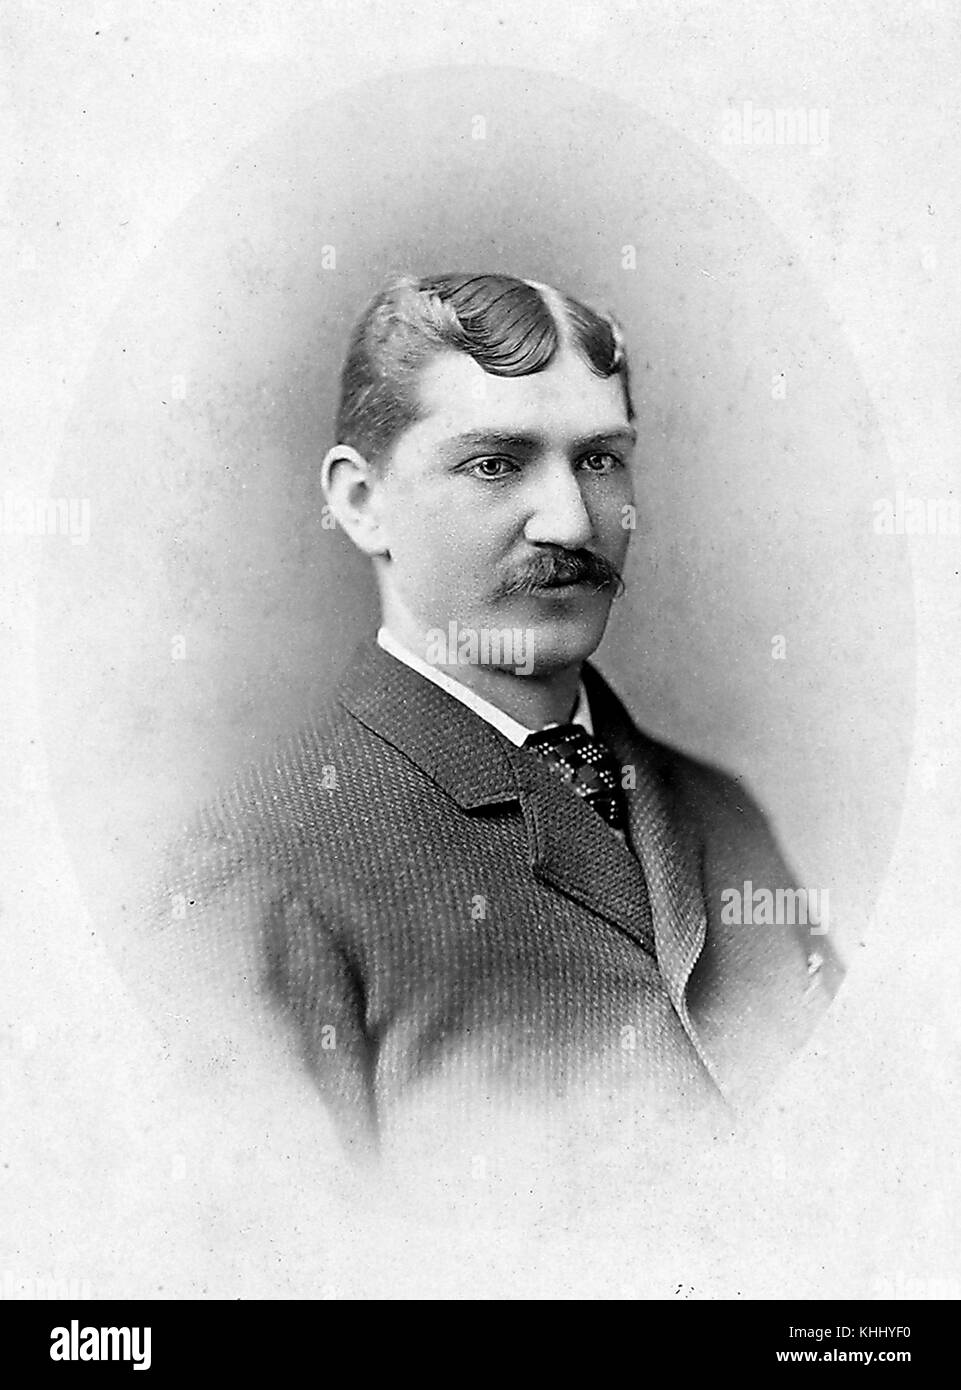 Portrait of Tommy Bond, Major League Baseball player who was a pitcher and a right fielder a total of ten seasons, 1900. From the New York Public Library. Stock Photo